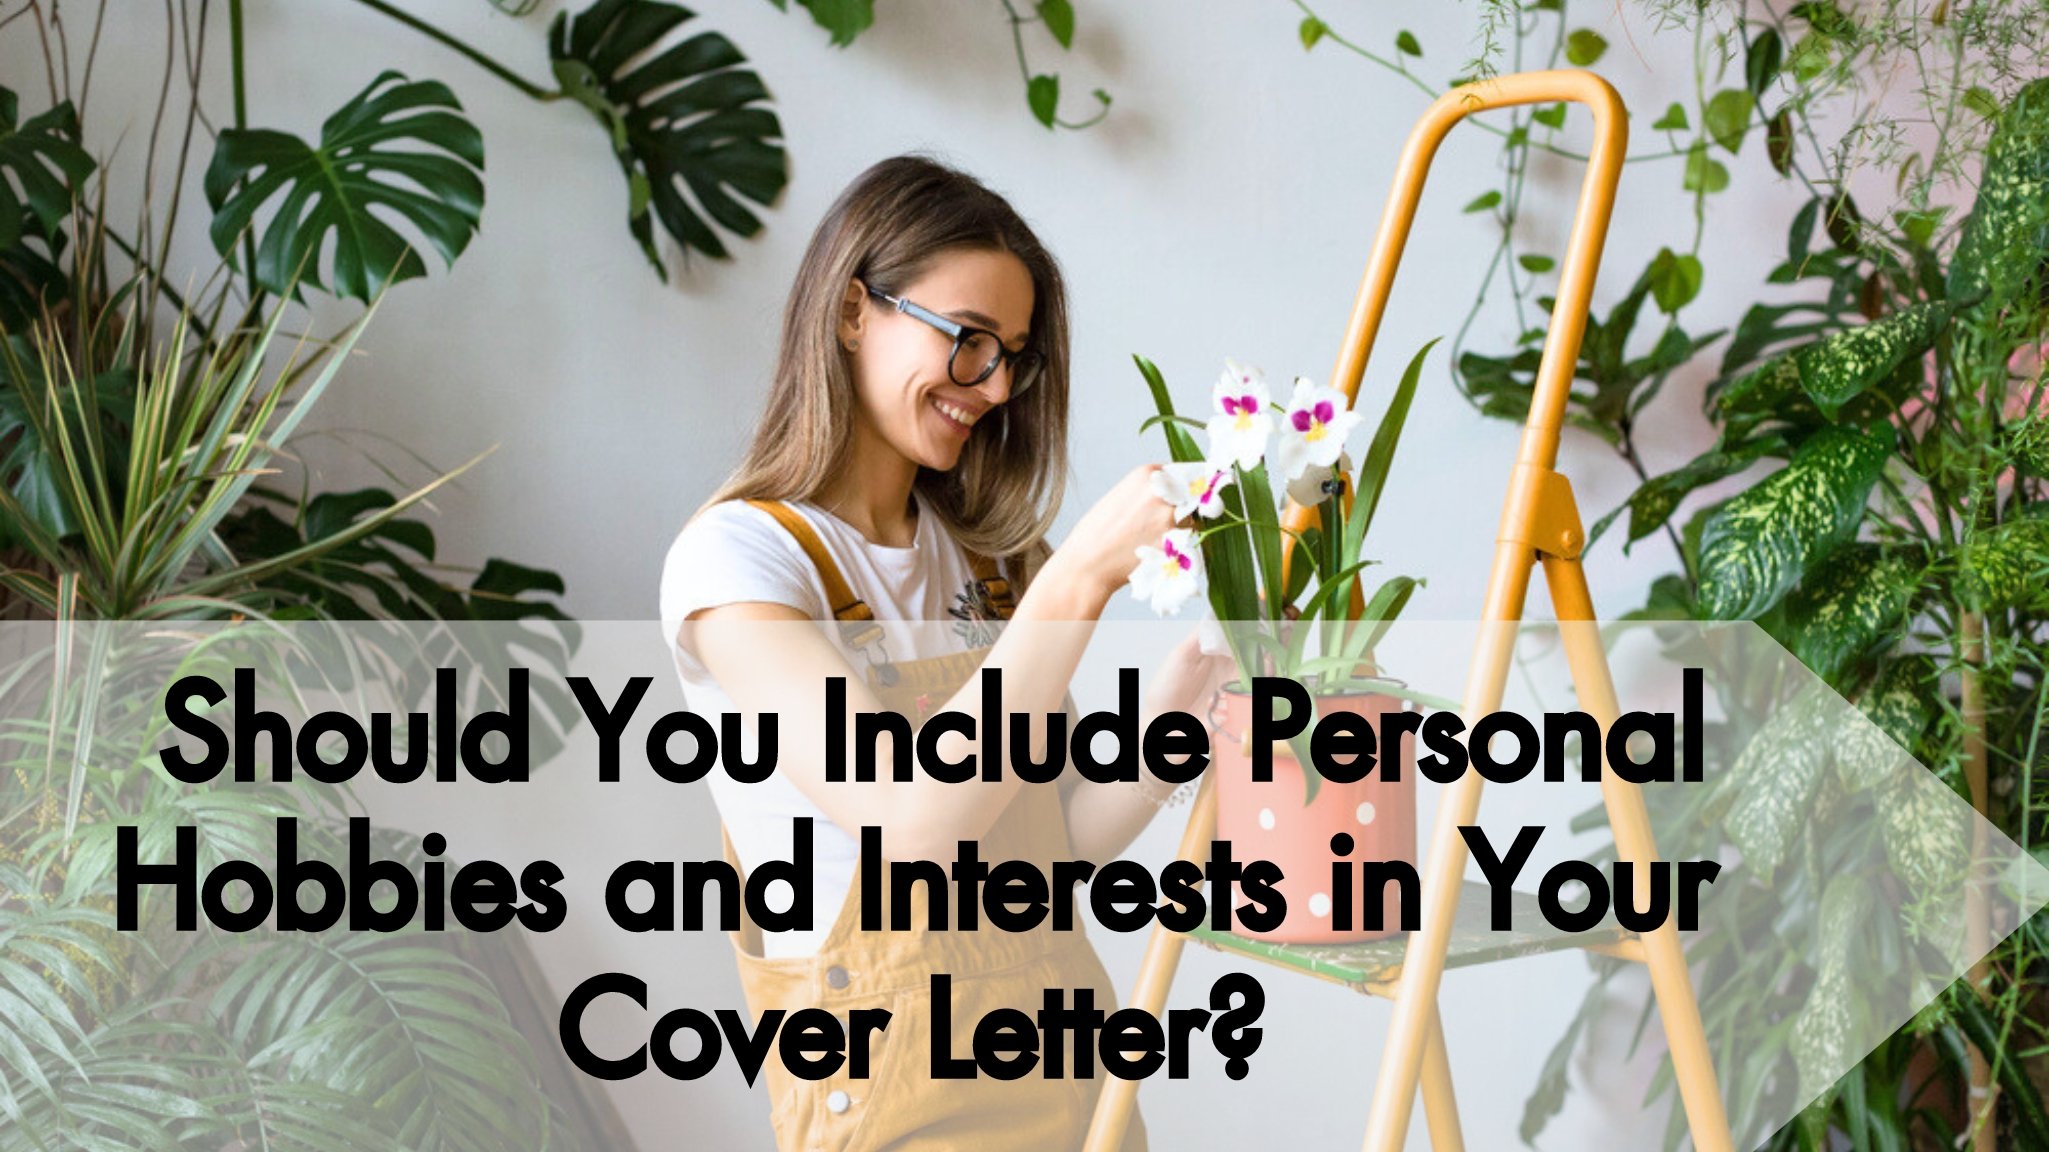 Should You Include Personal Hobbies and Interests in Your Cover Letter?